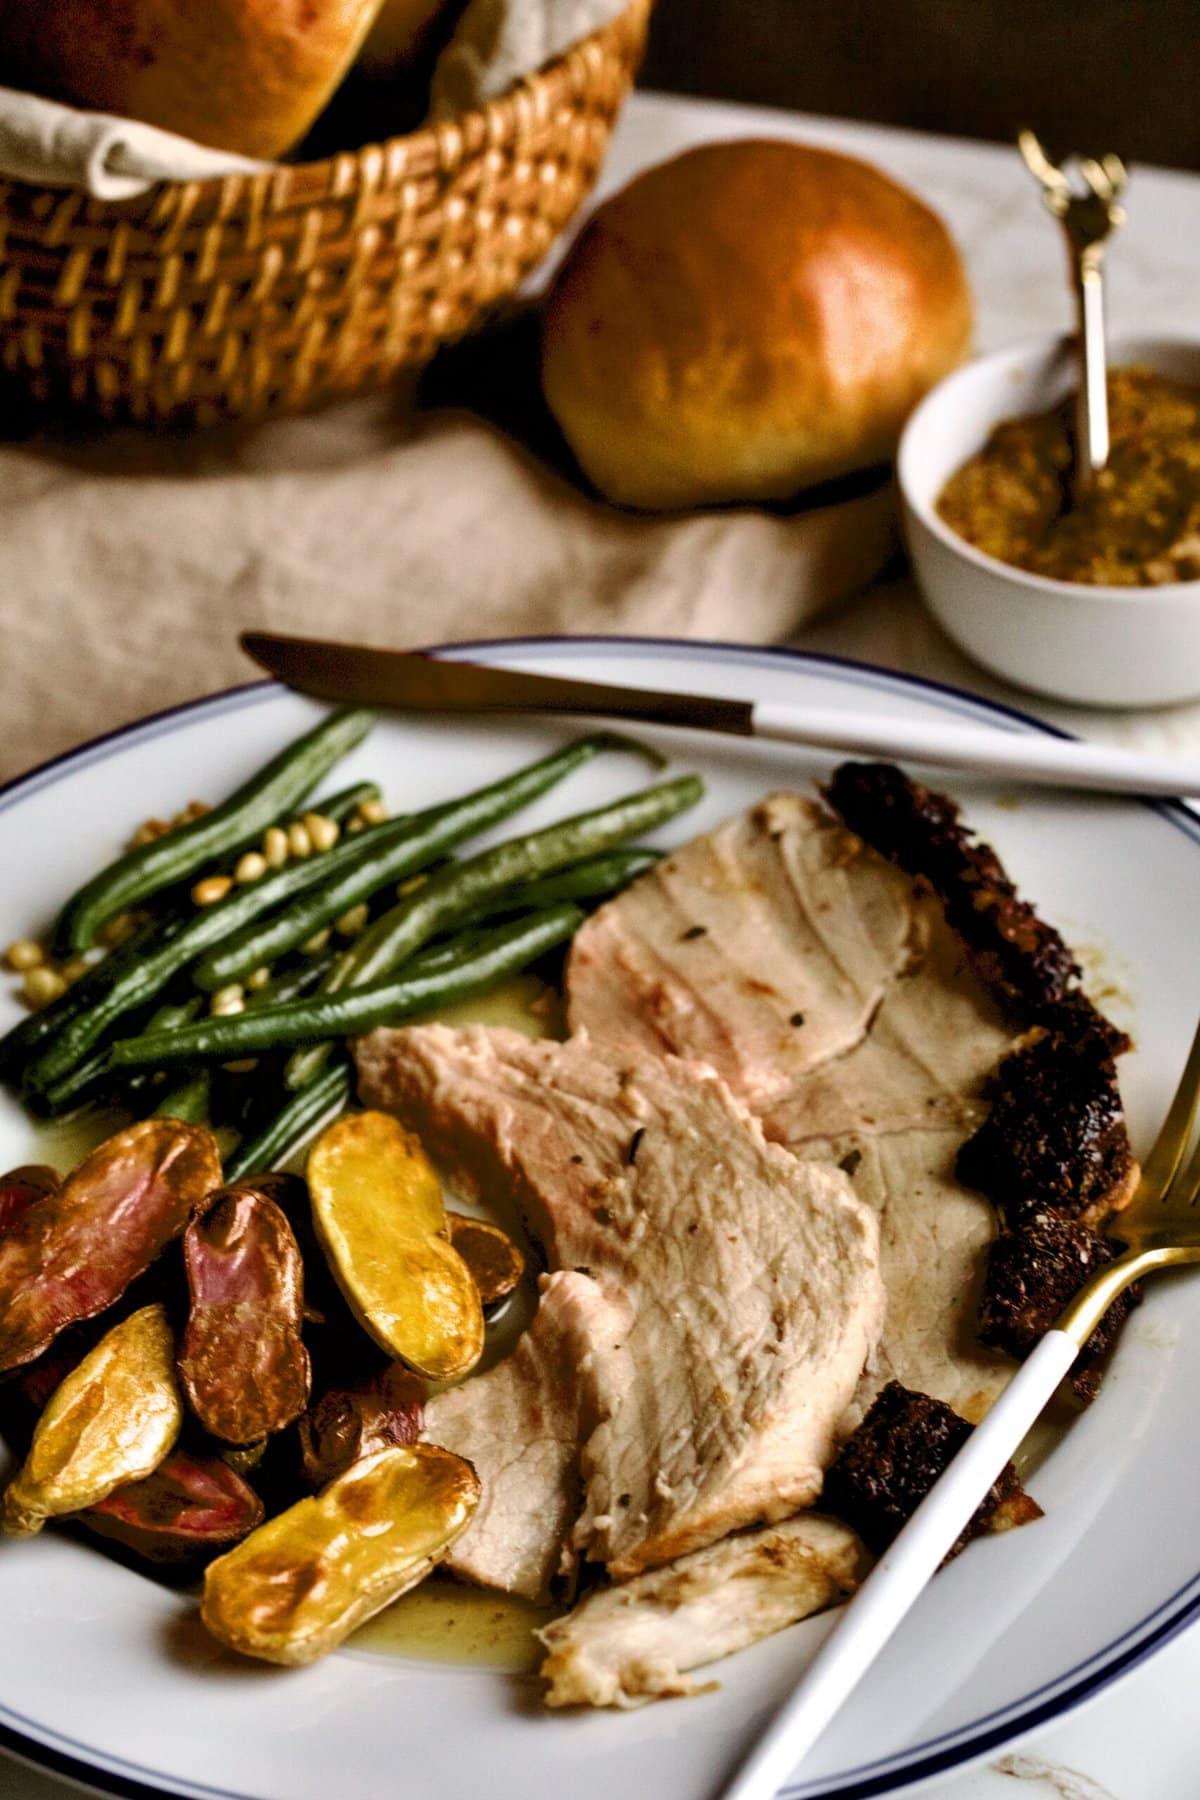 resh ham roast on a plate with roasted potatoes and green beans. A bread basket with rolls to the side.